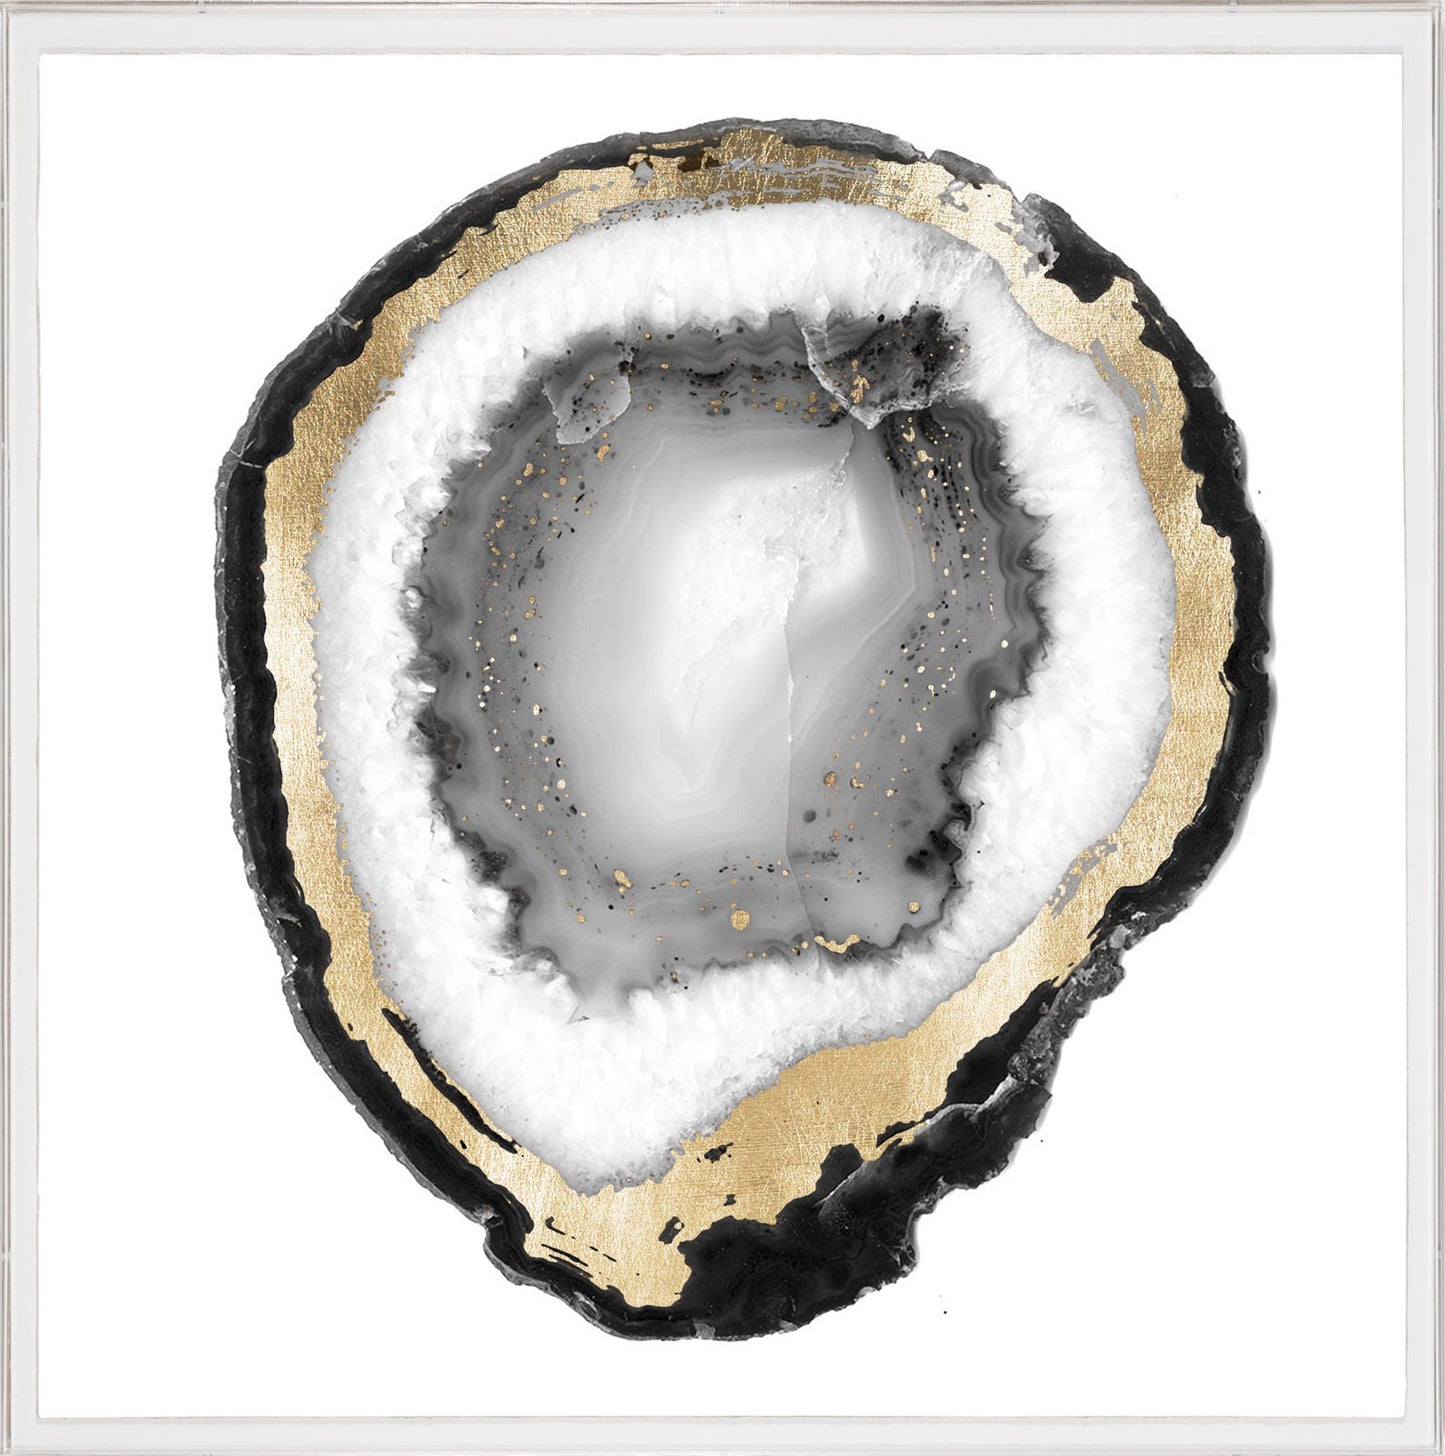 Natural Curiosities Black and White Geode 1 Artwork